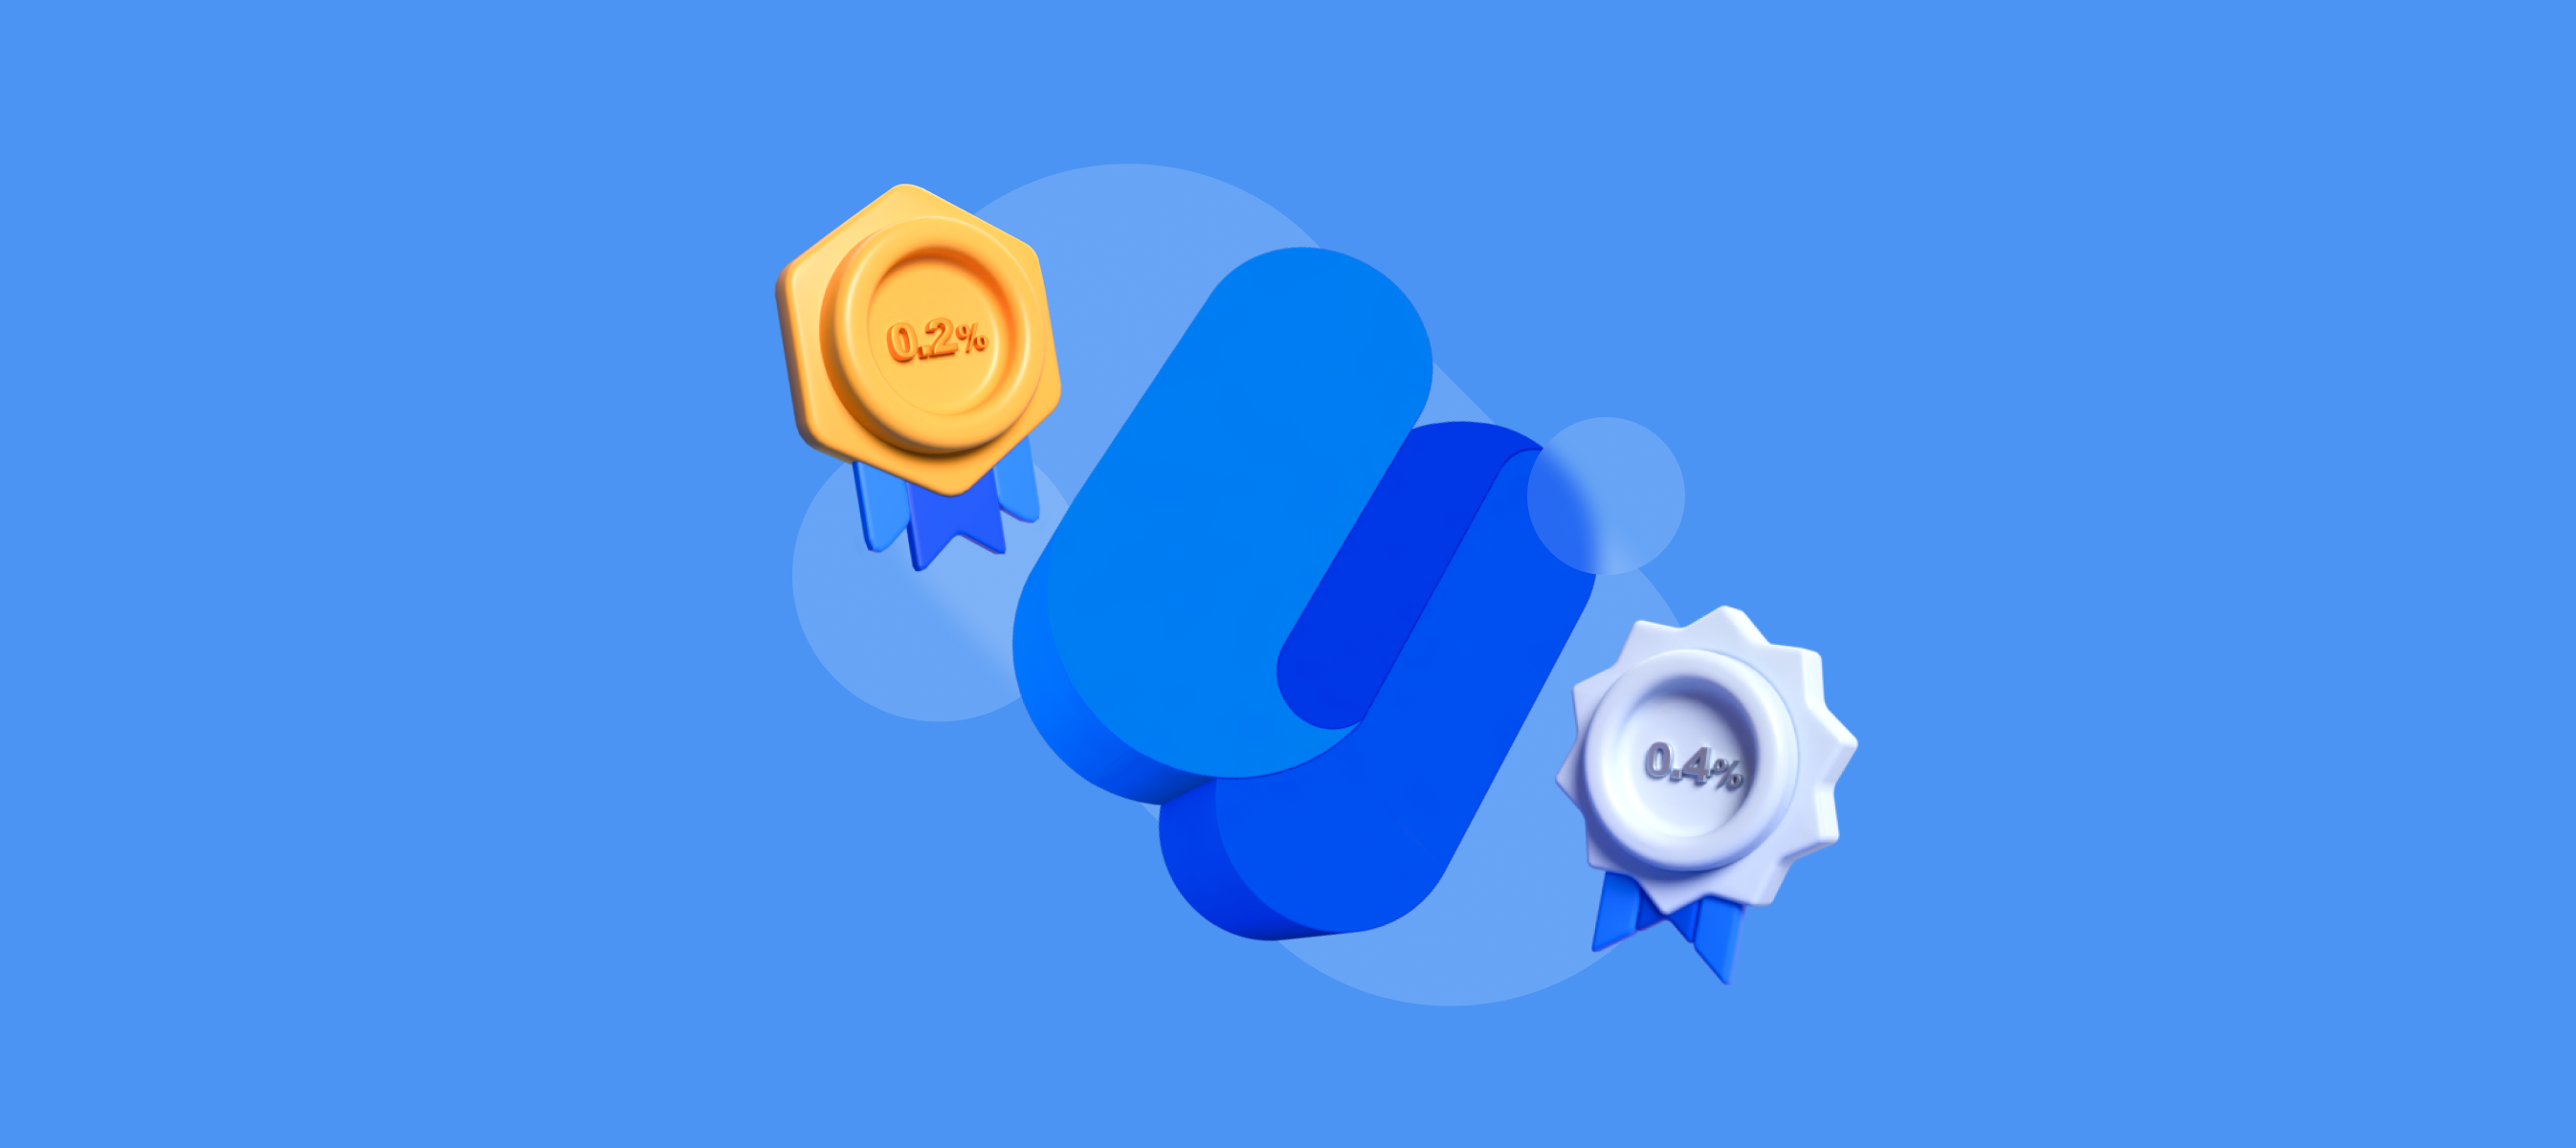 SimpleSwap Launched a New Loyalty Program